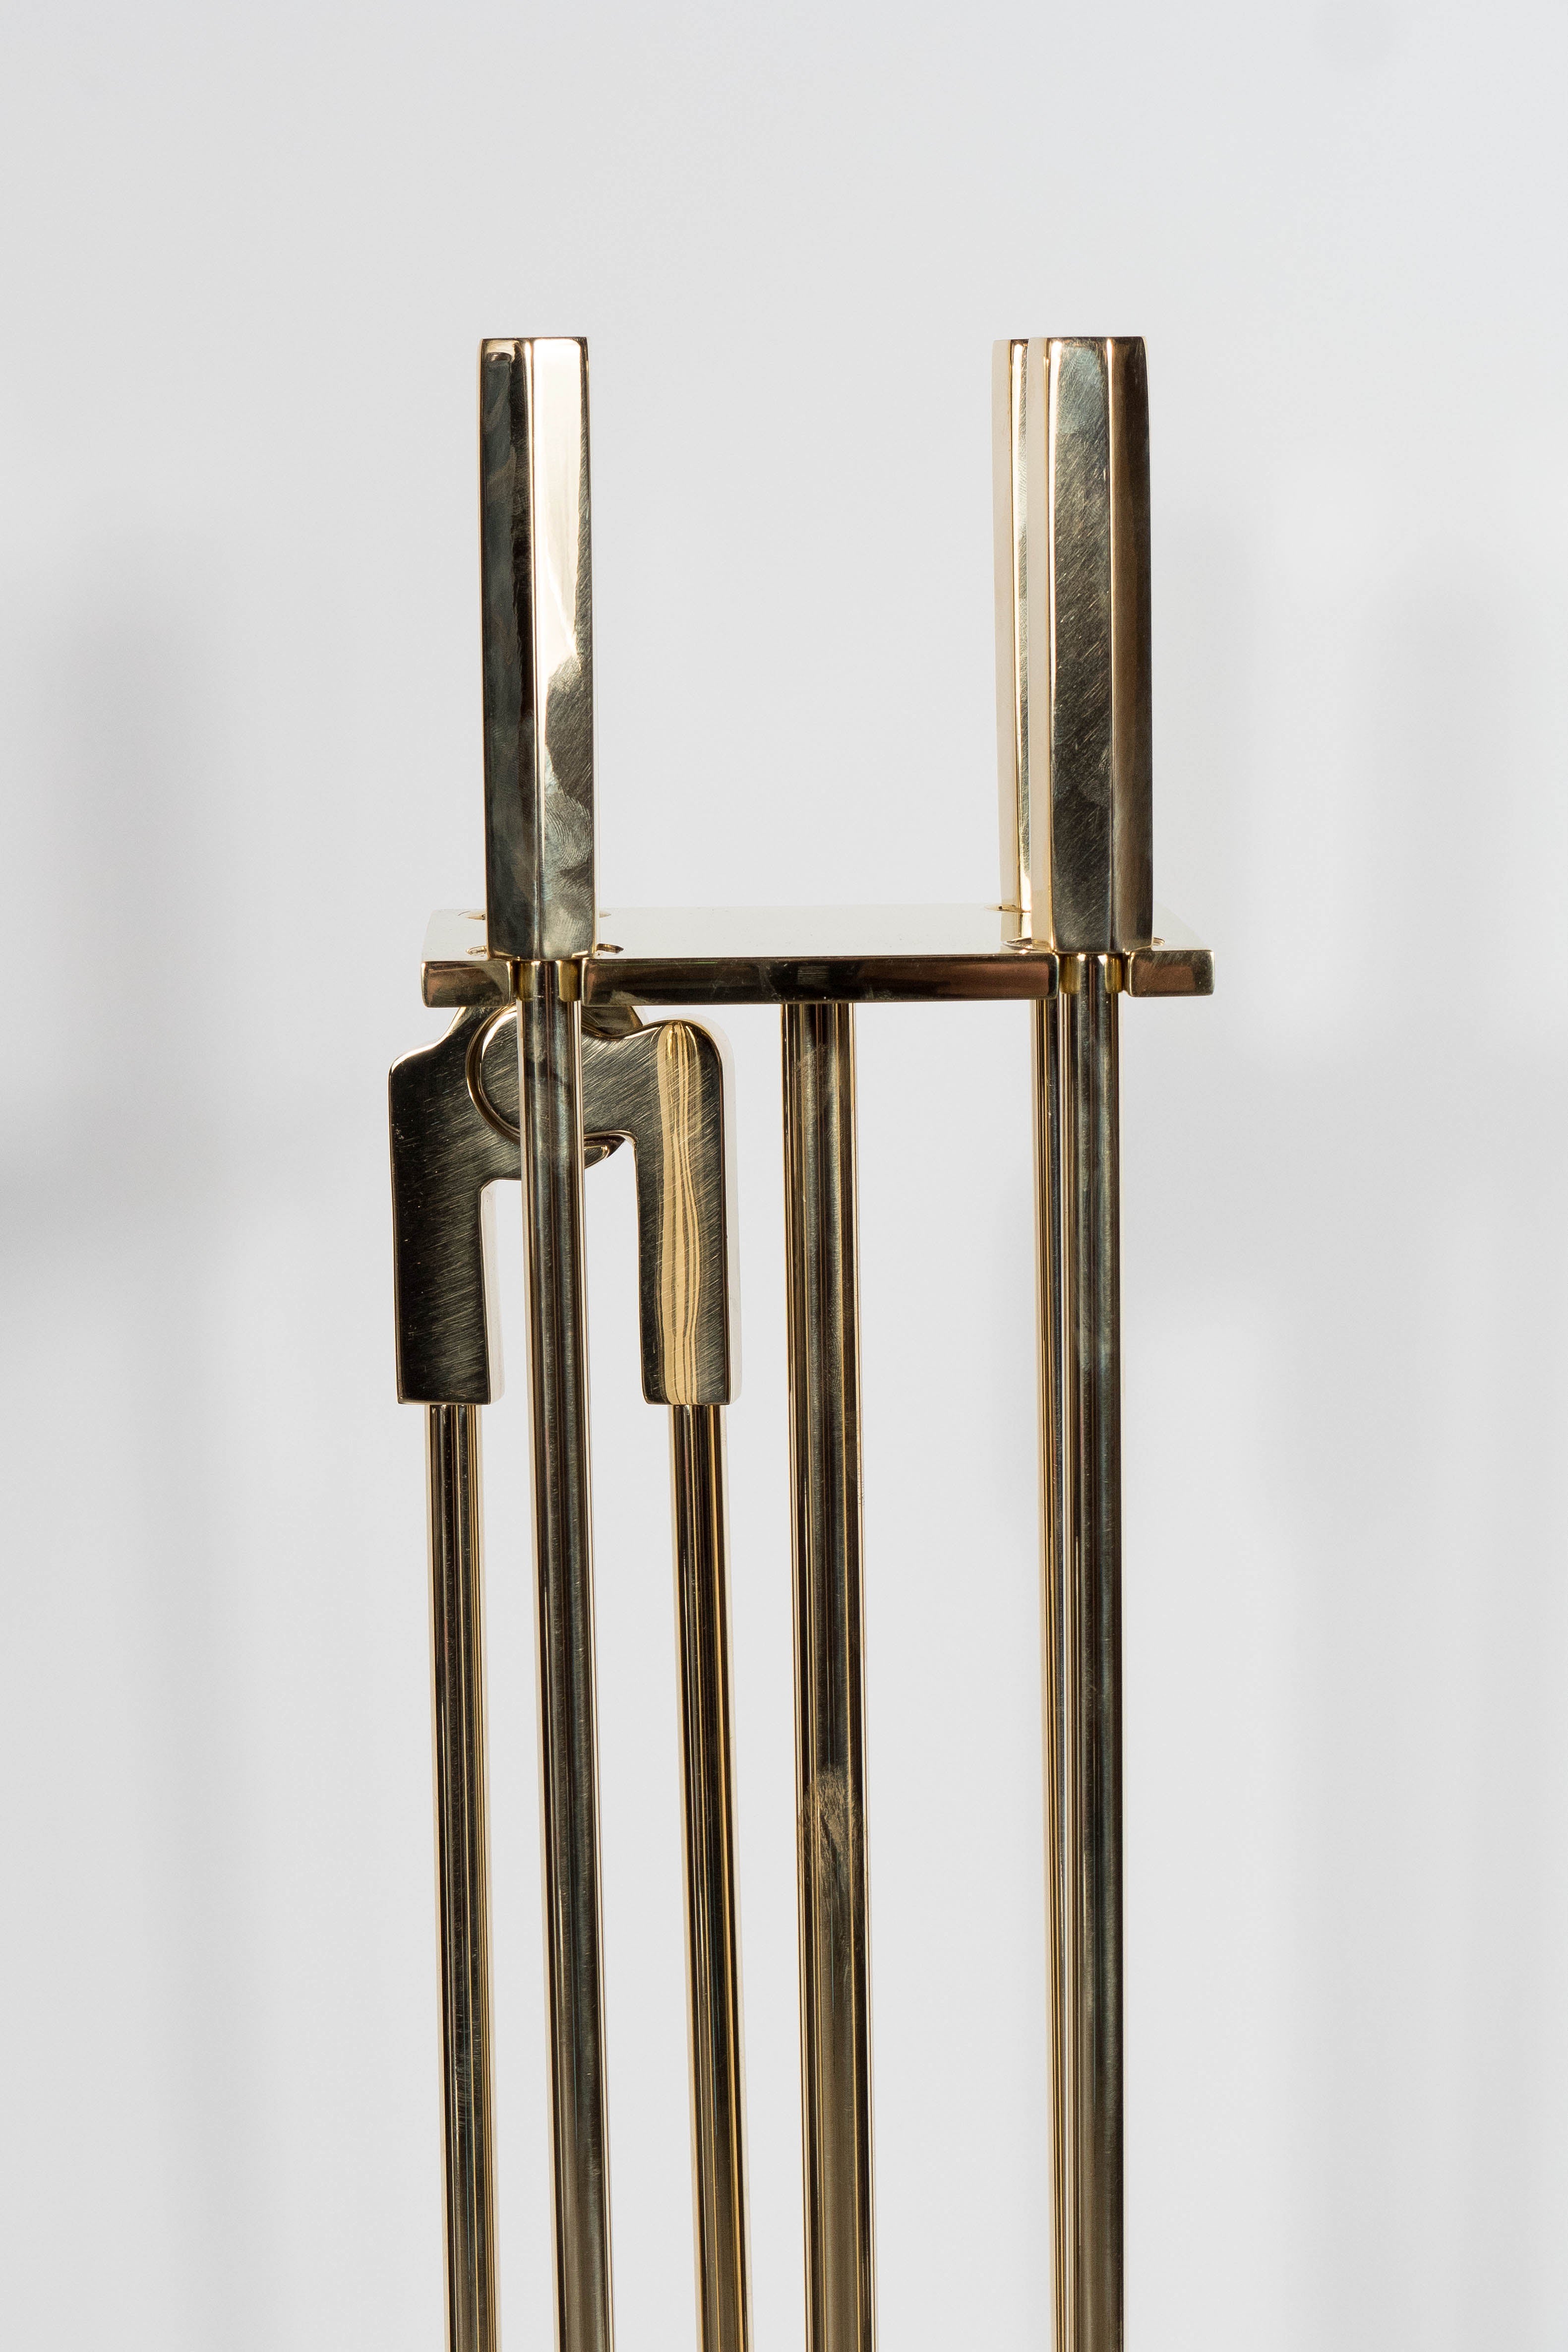 American Custom Modernist Four-Piece Fire Tool Set in Polished Brass For Sale